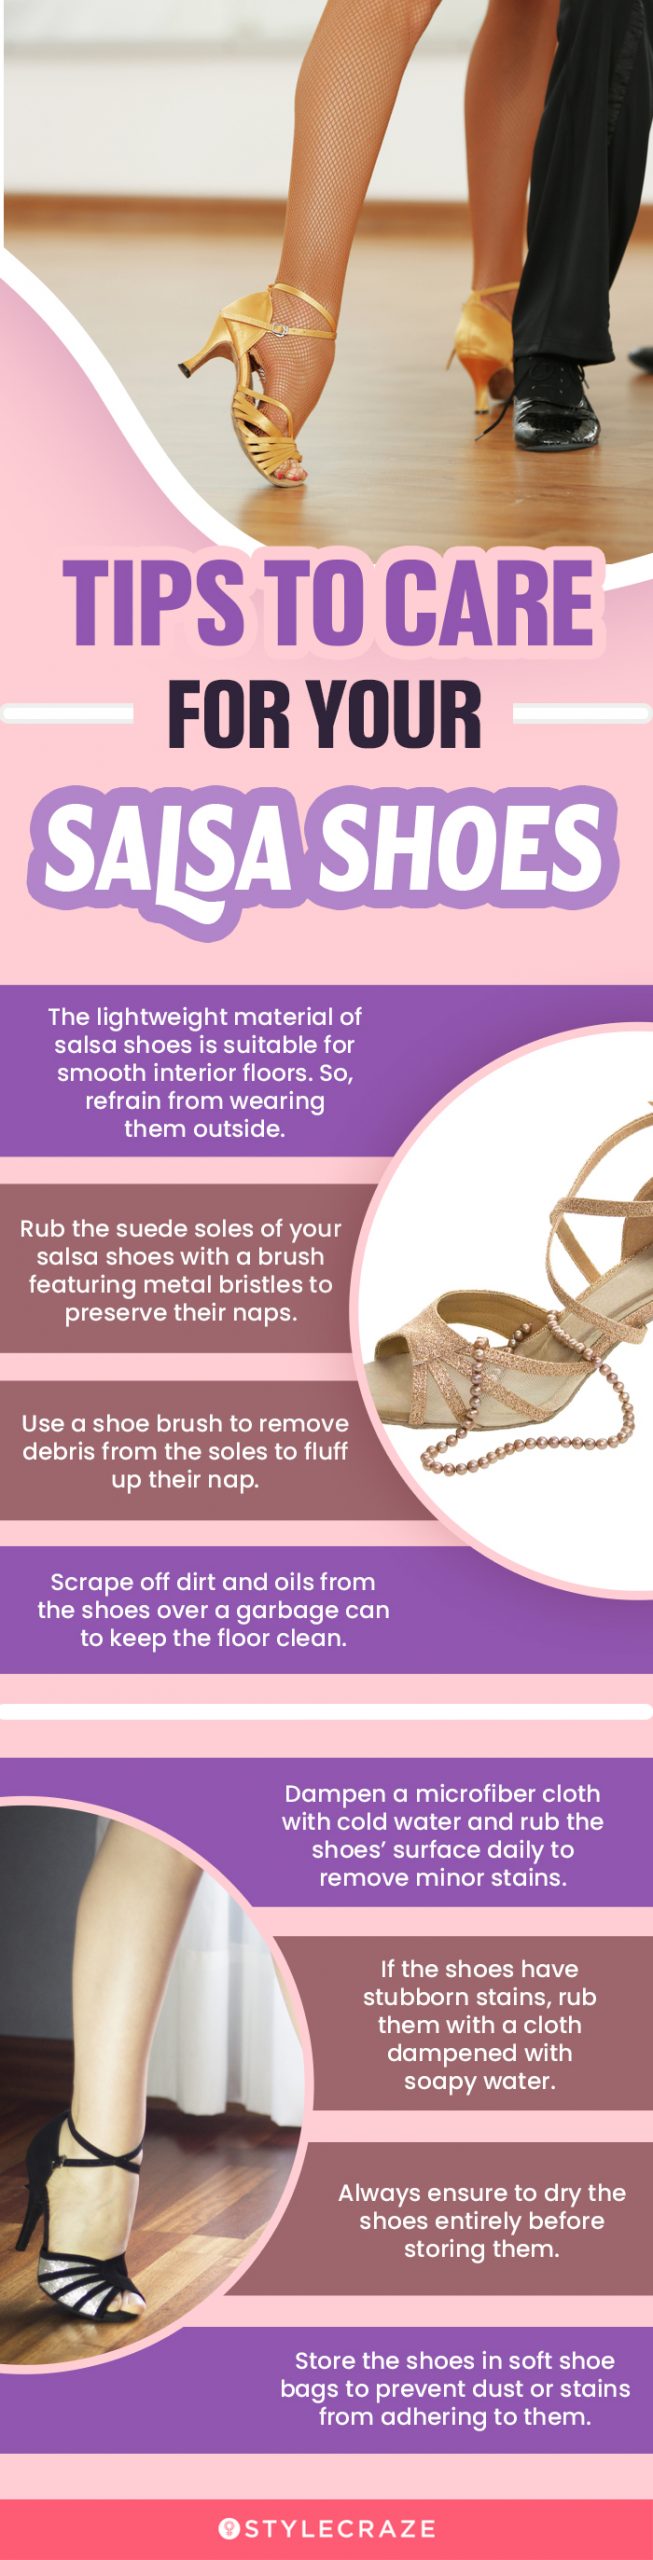 Tips To Care For Your Salsa Shoes (infographic)